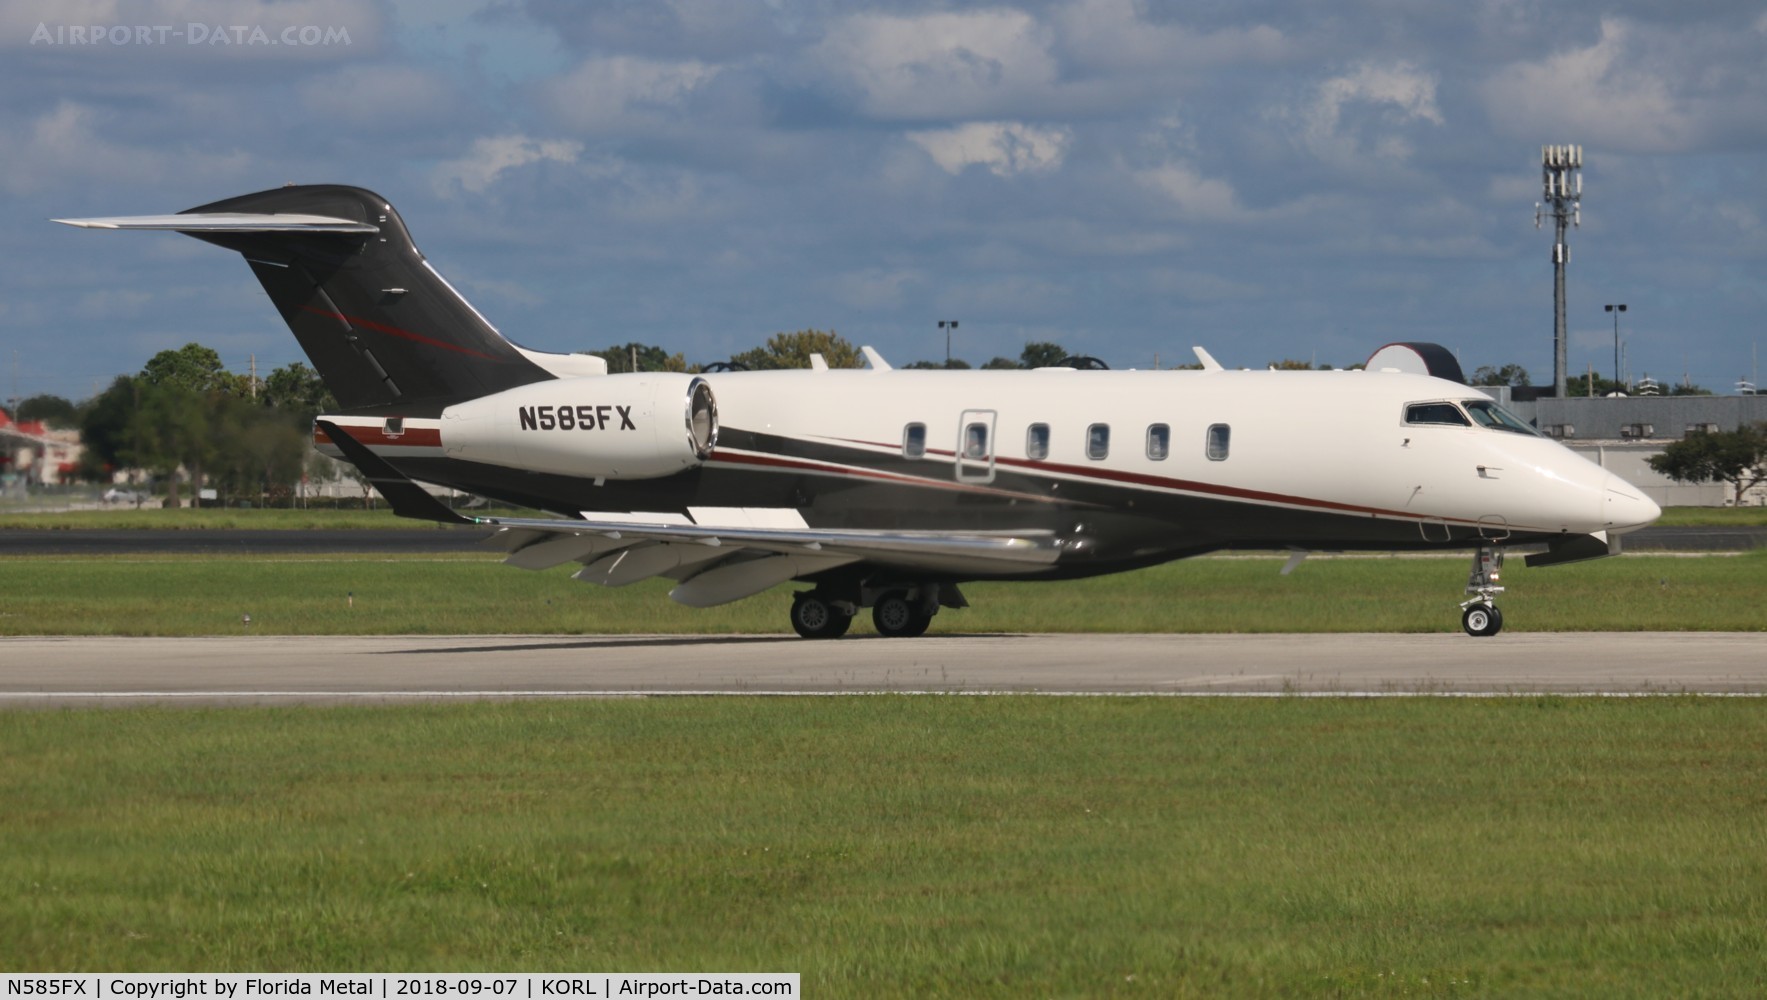 N585FX, 2017 Bombardier Challenger 350 (BD-100-1A10) C/N 20707, Challenger 350 zx